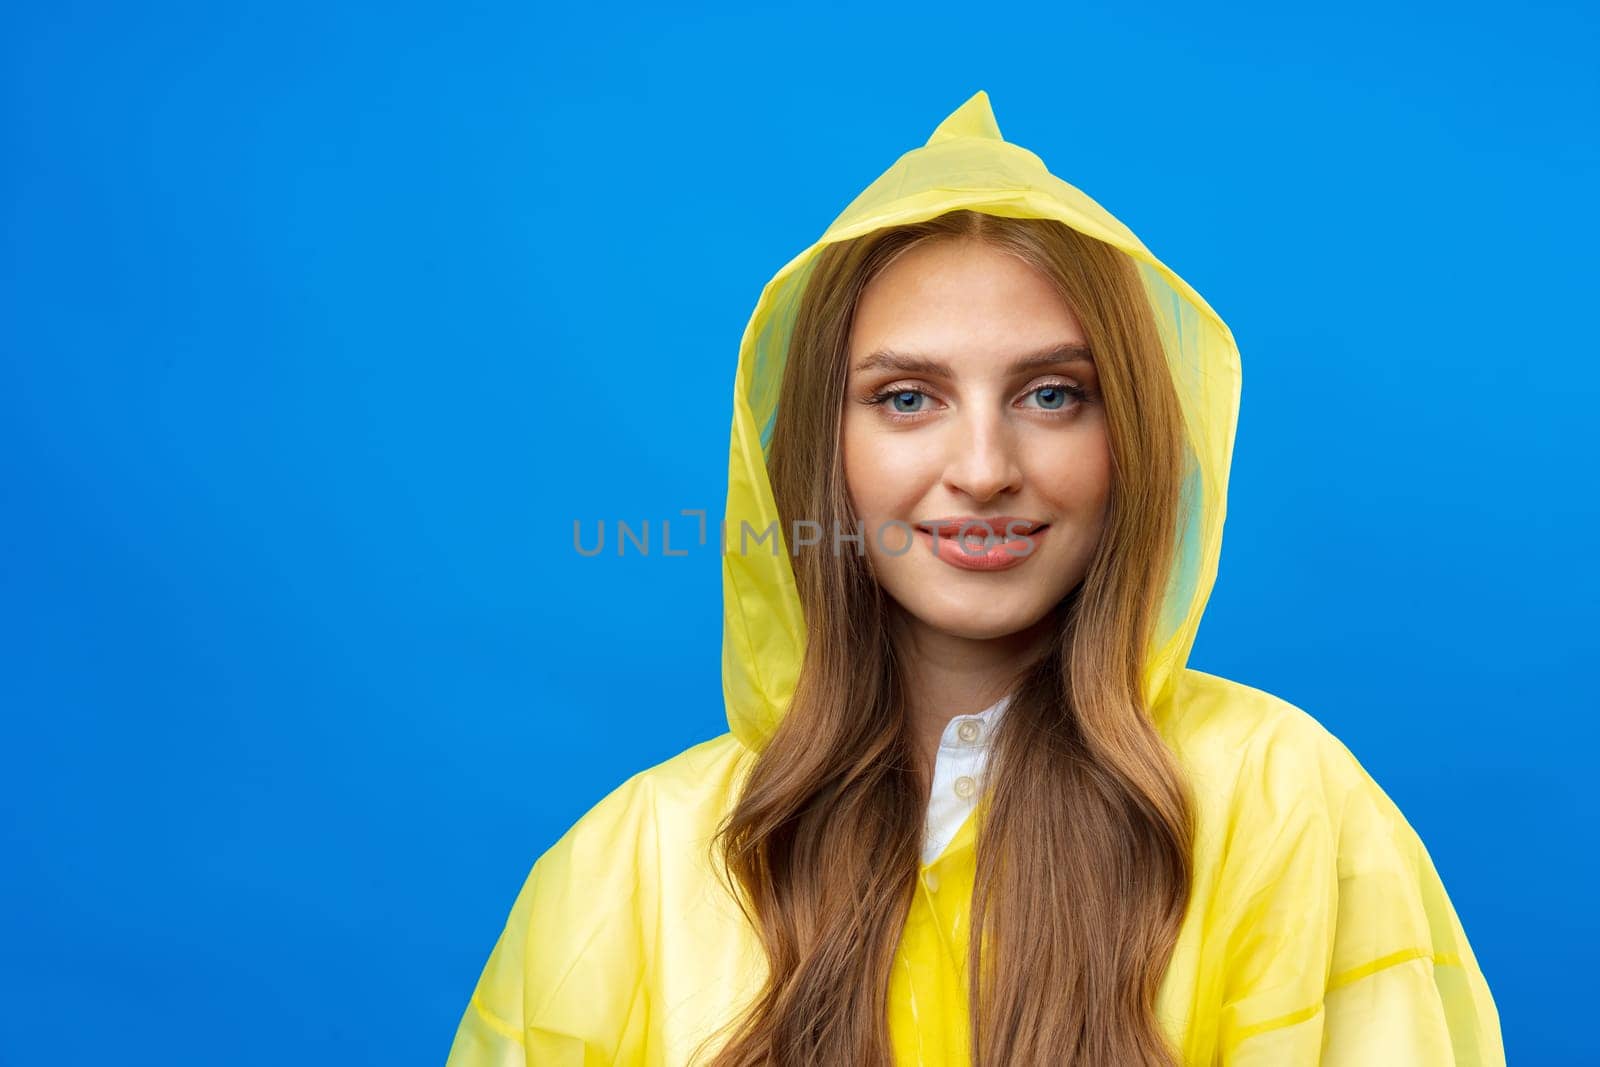 Young blonde woman wearing yellow raincoat smiling at camera over blue background in studio, close up